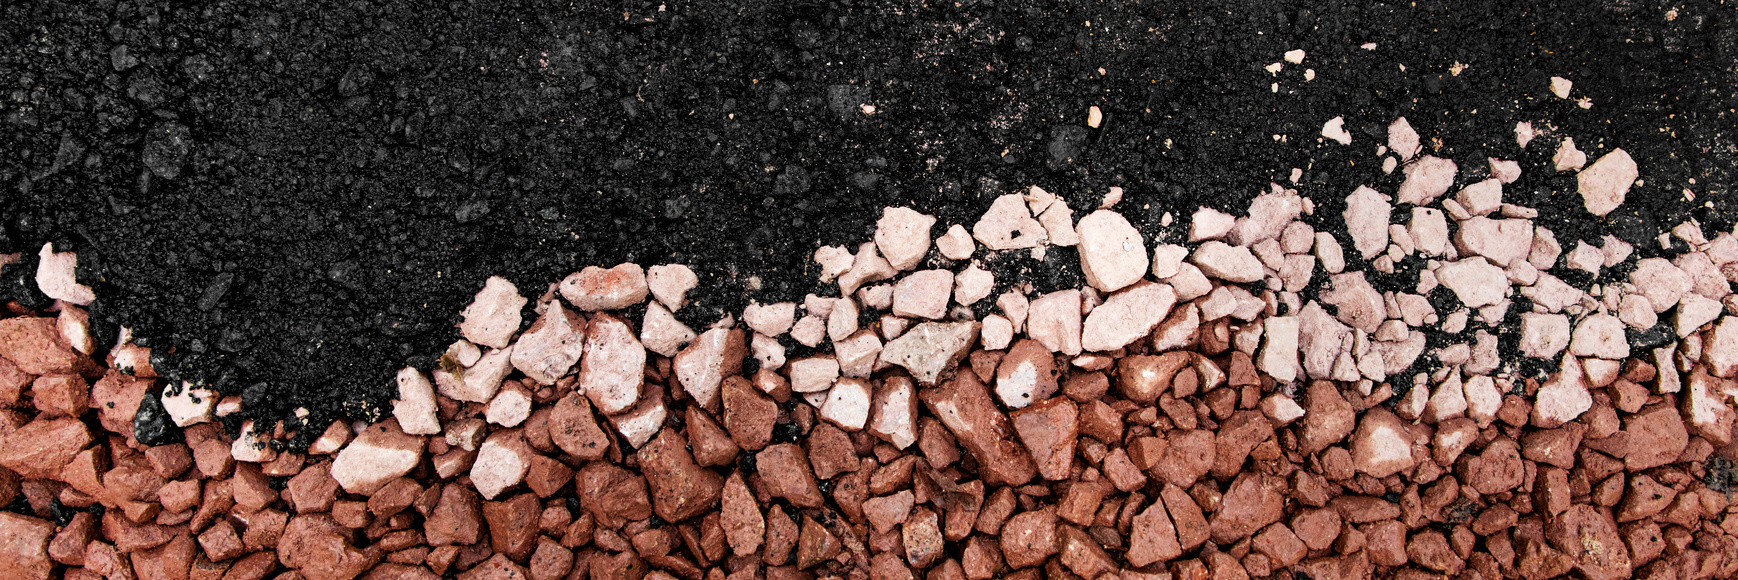 hot asphalt drying on base course with gravel and stones, panorama